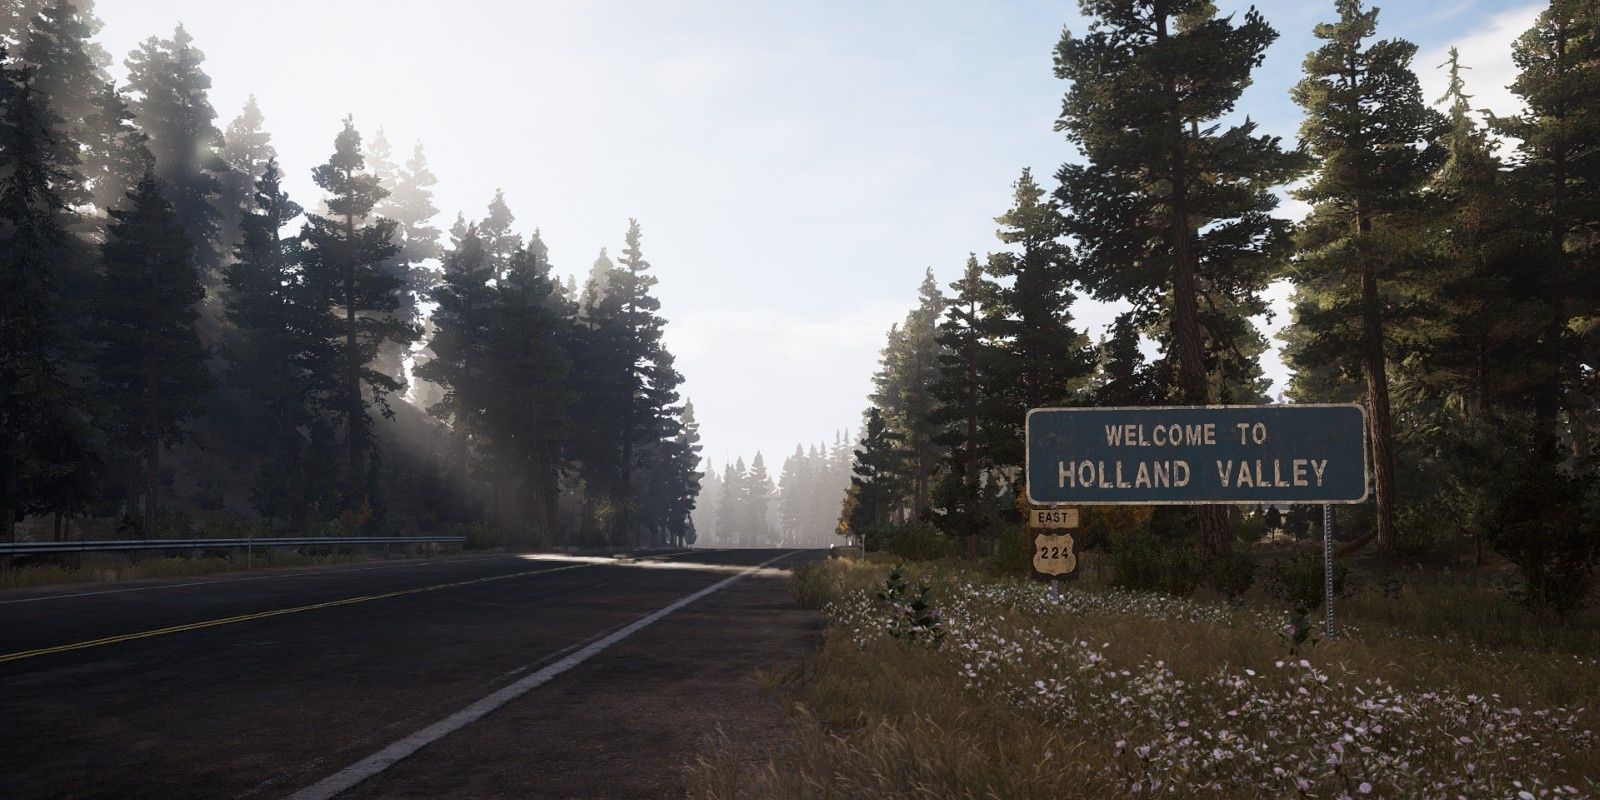 Holland Valley in Far Cry 5